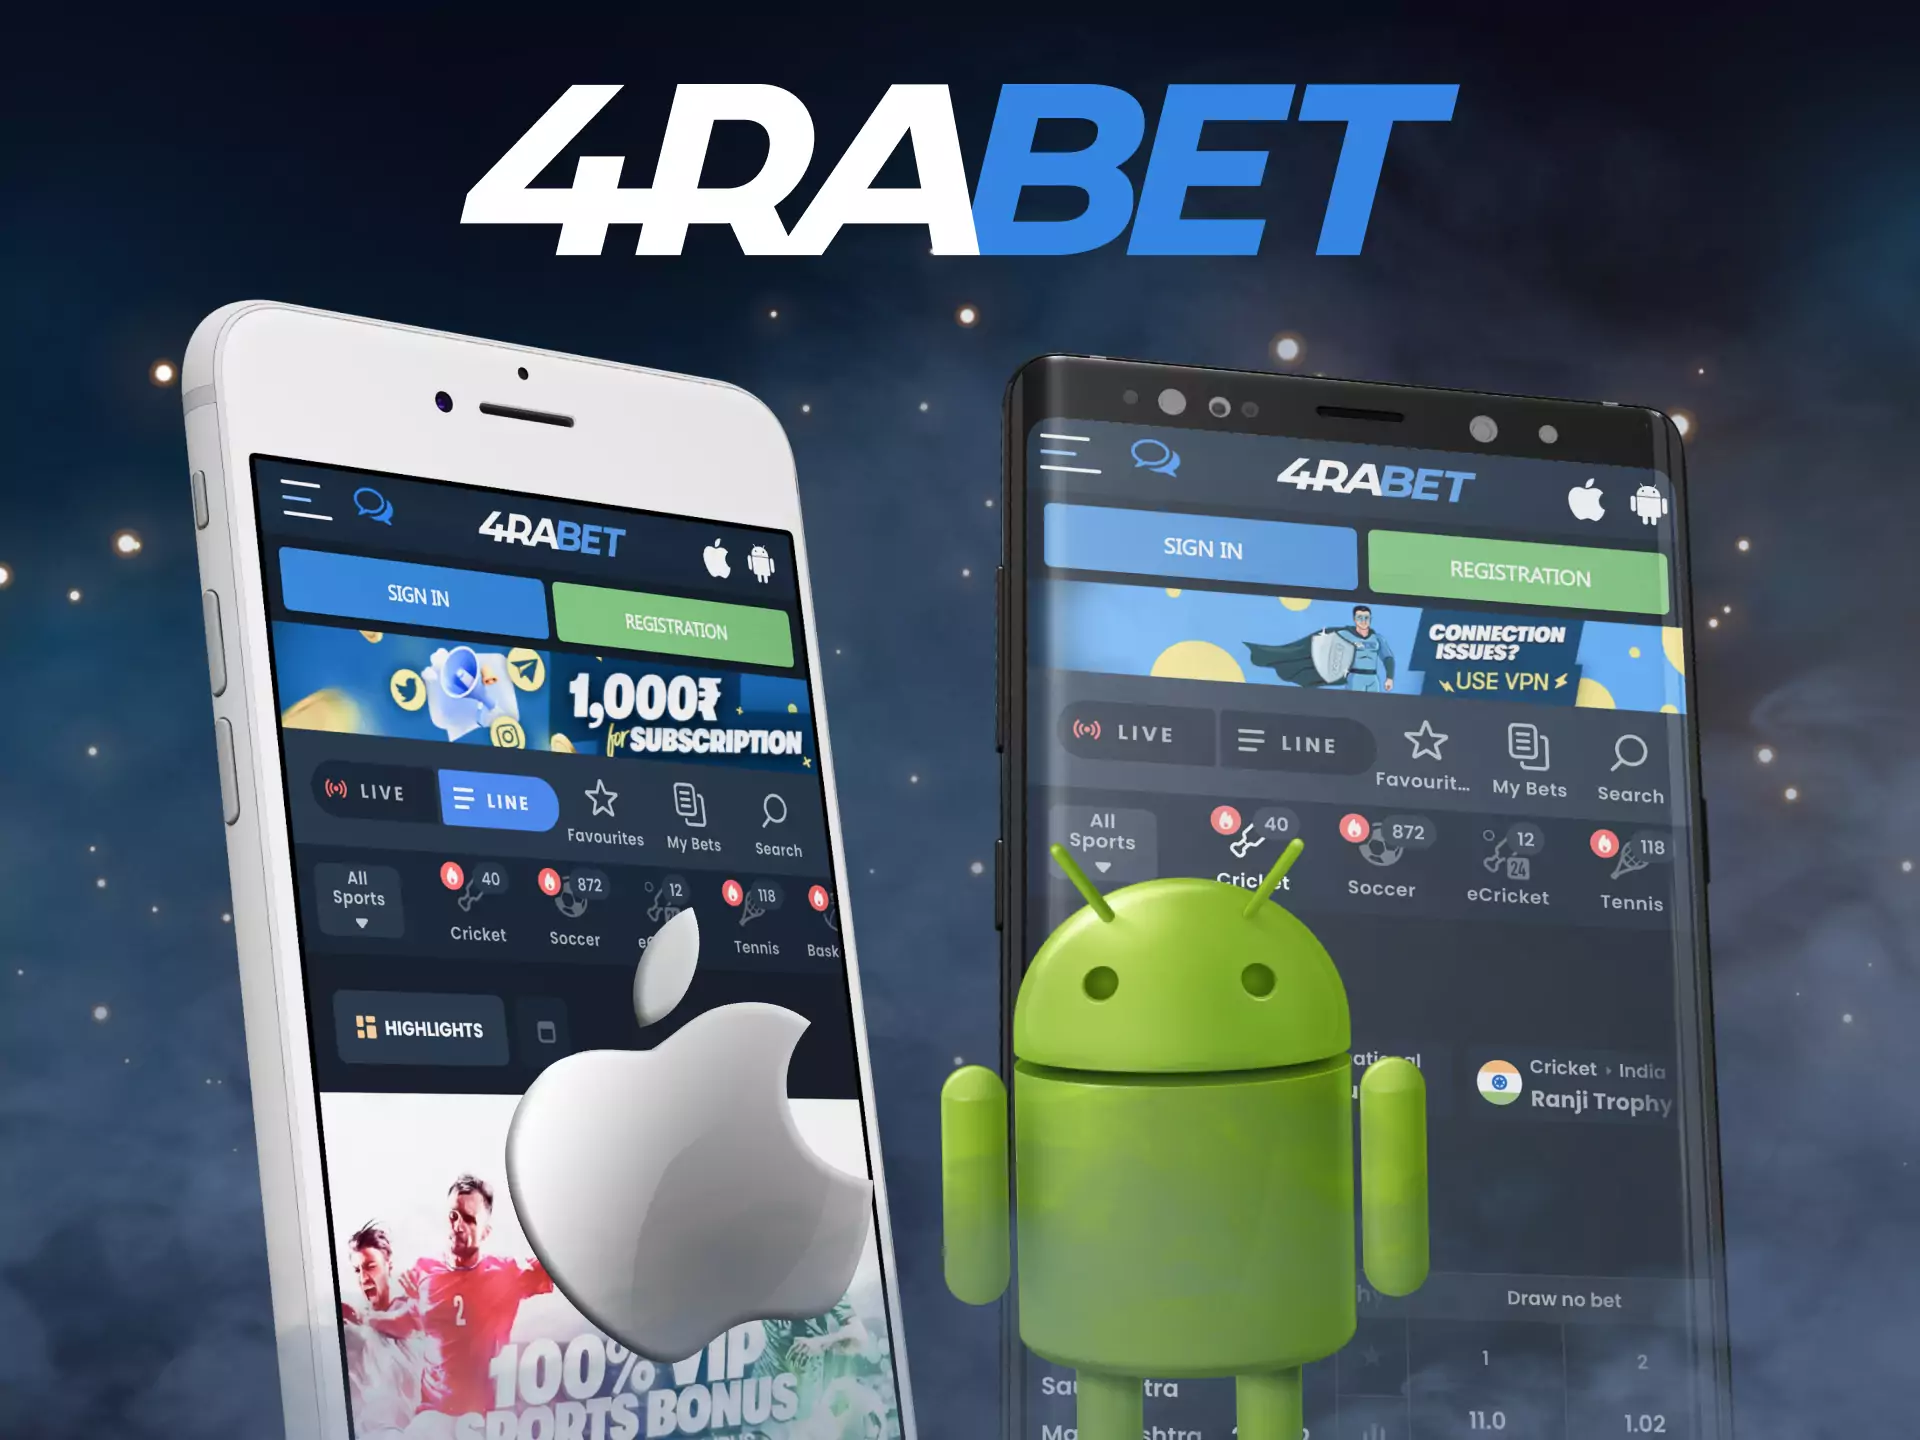 Use the instructions to install the 4rabet app on your mobile device.